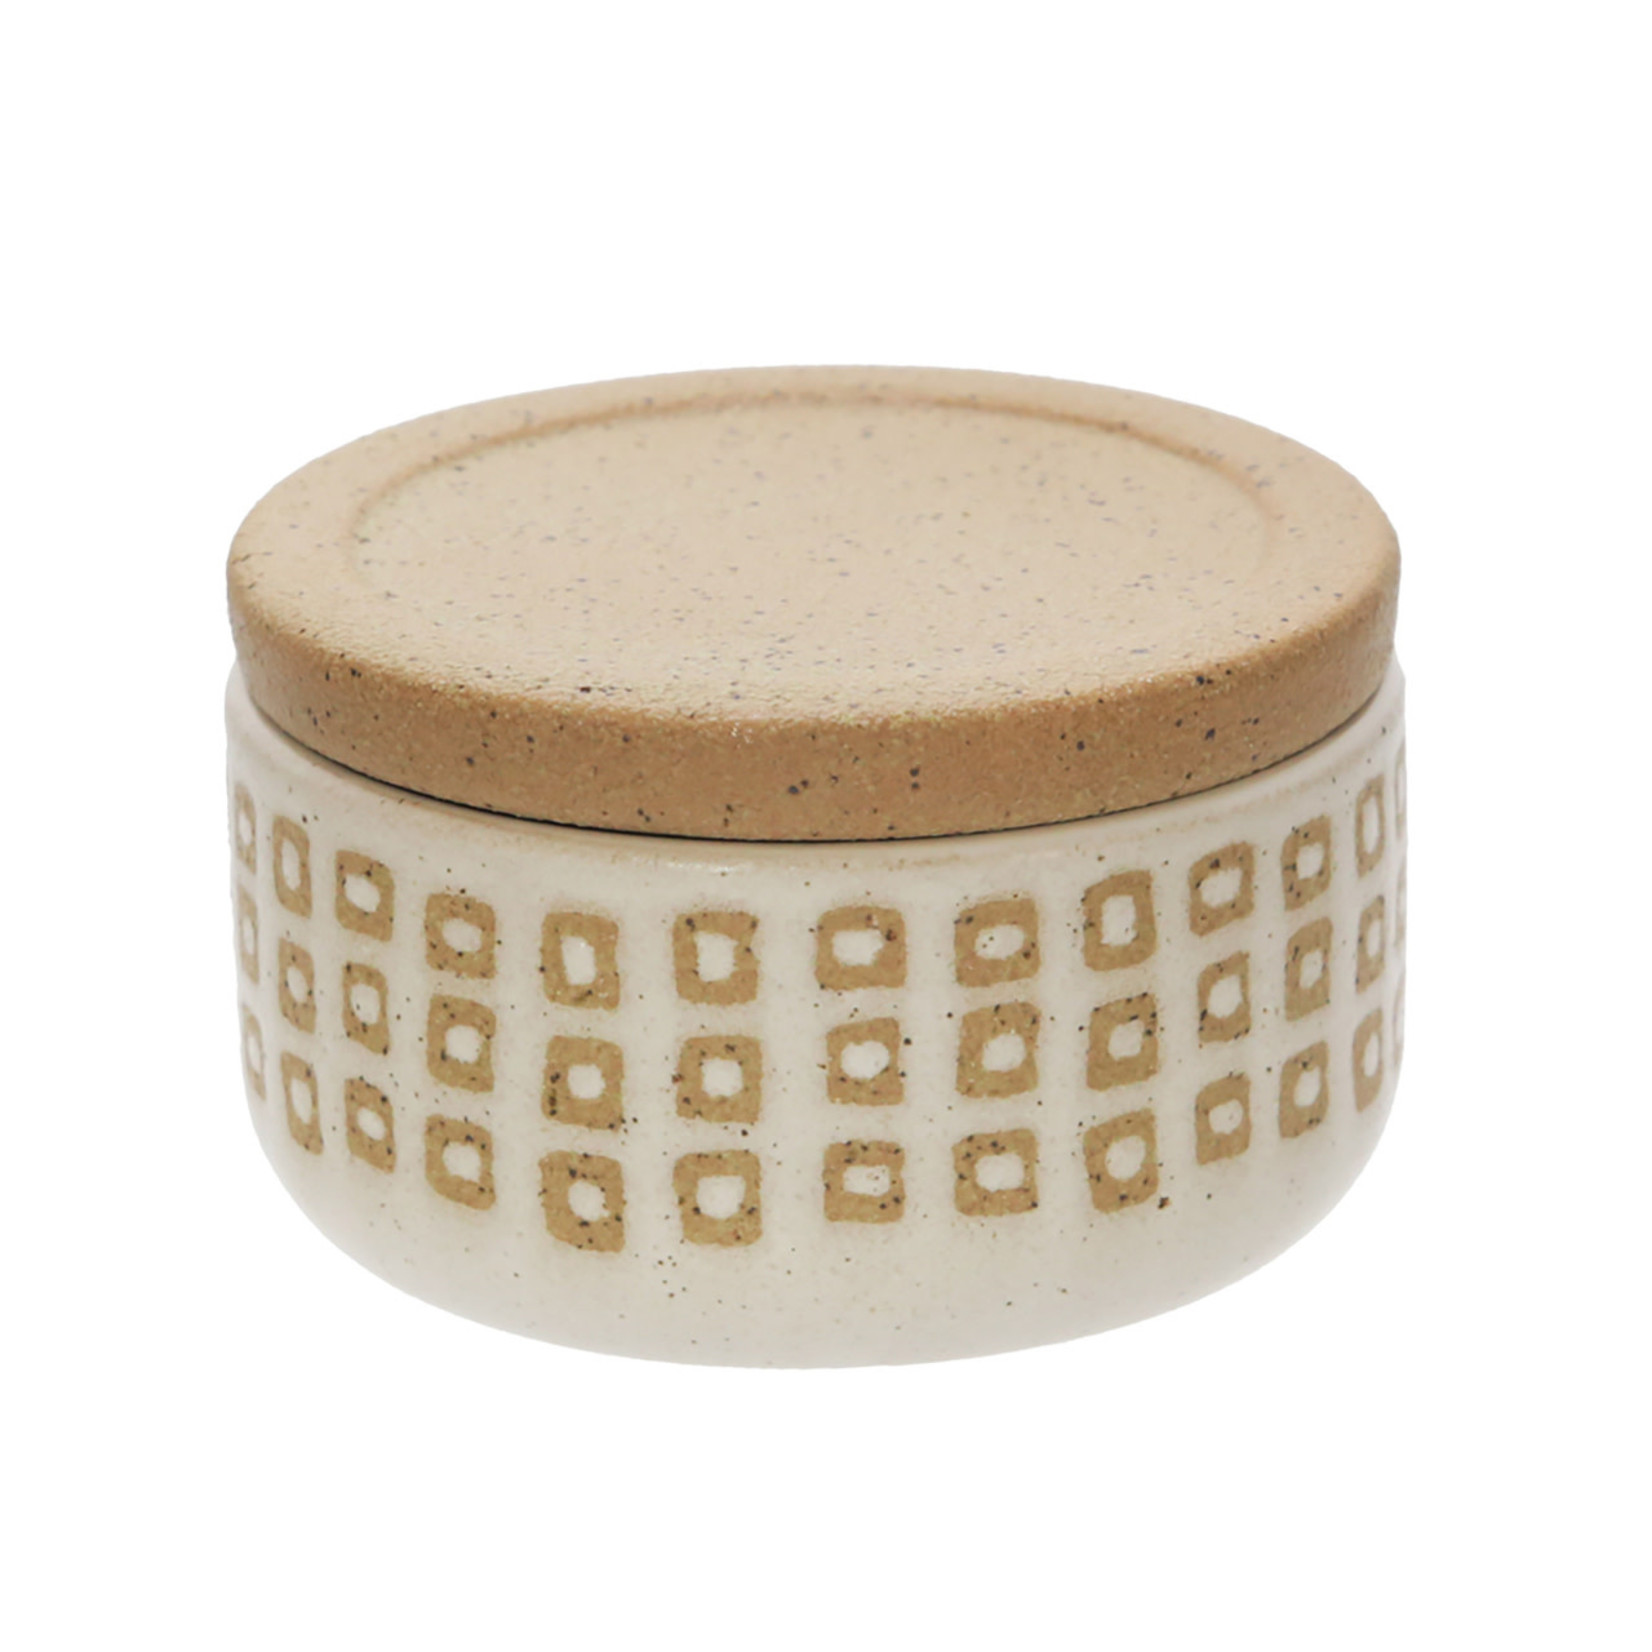 Dotted Ceramic Covered Jar